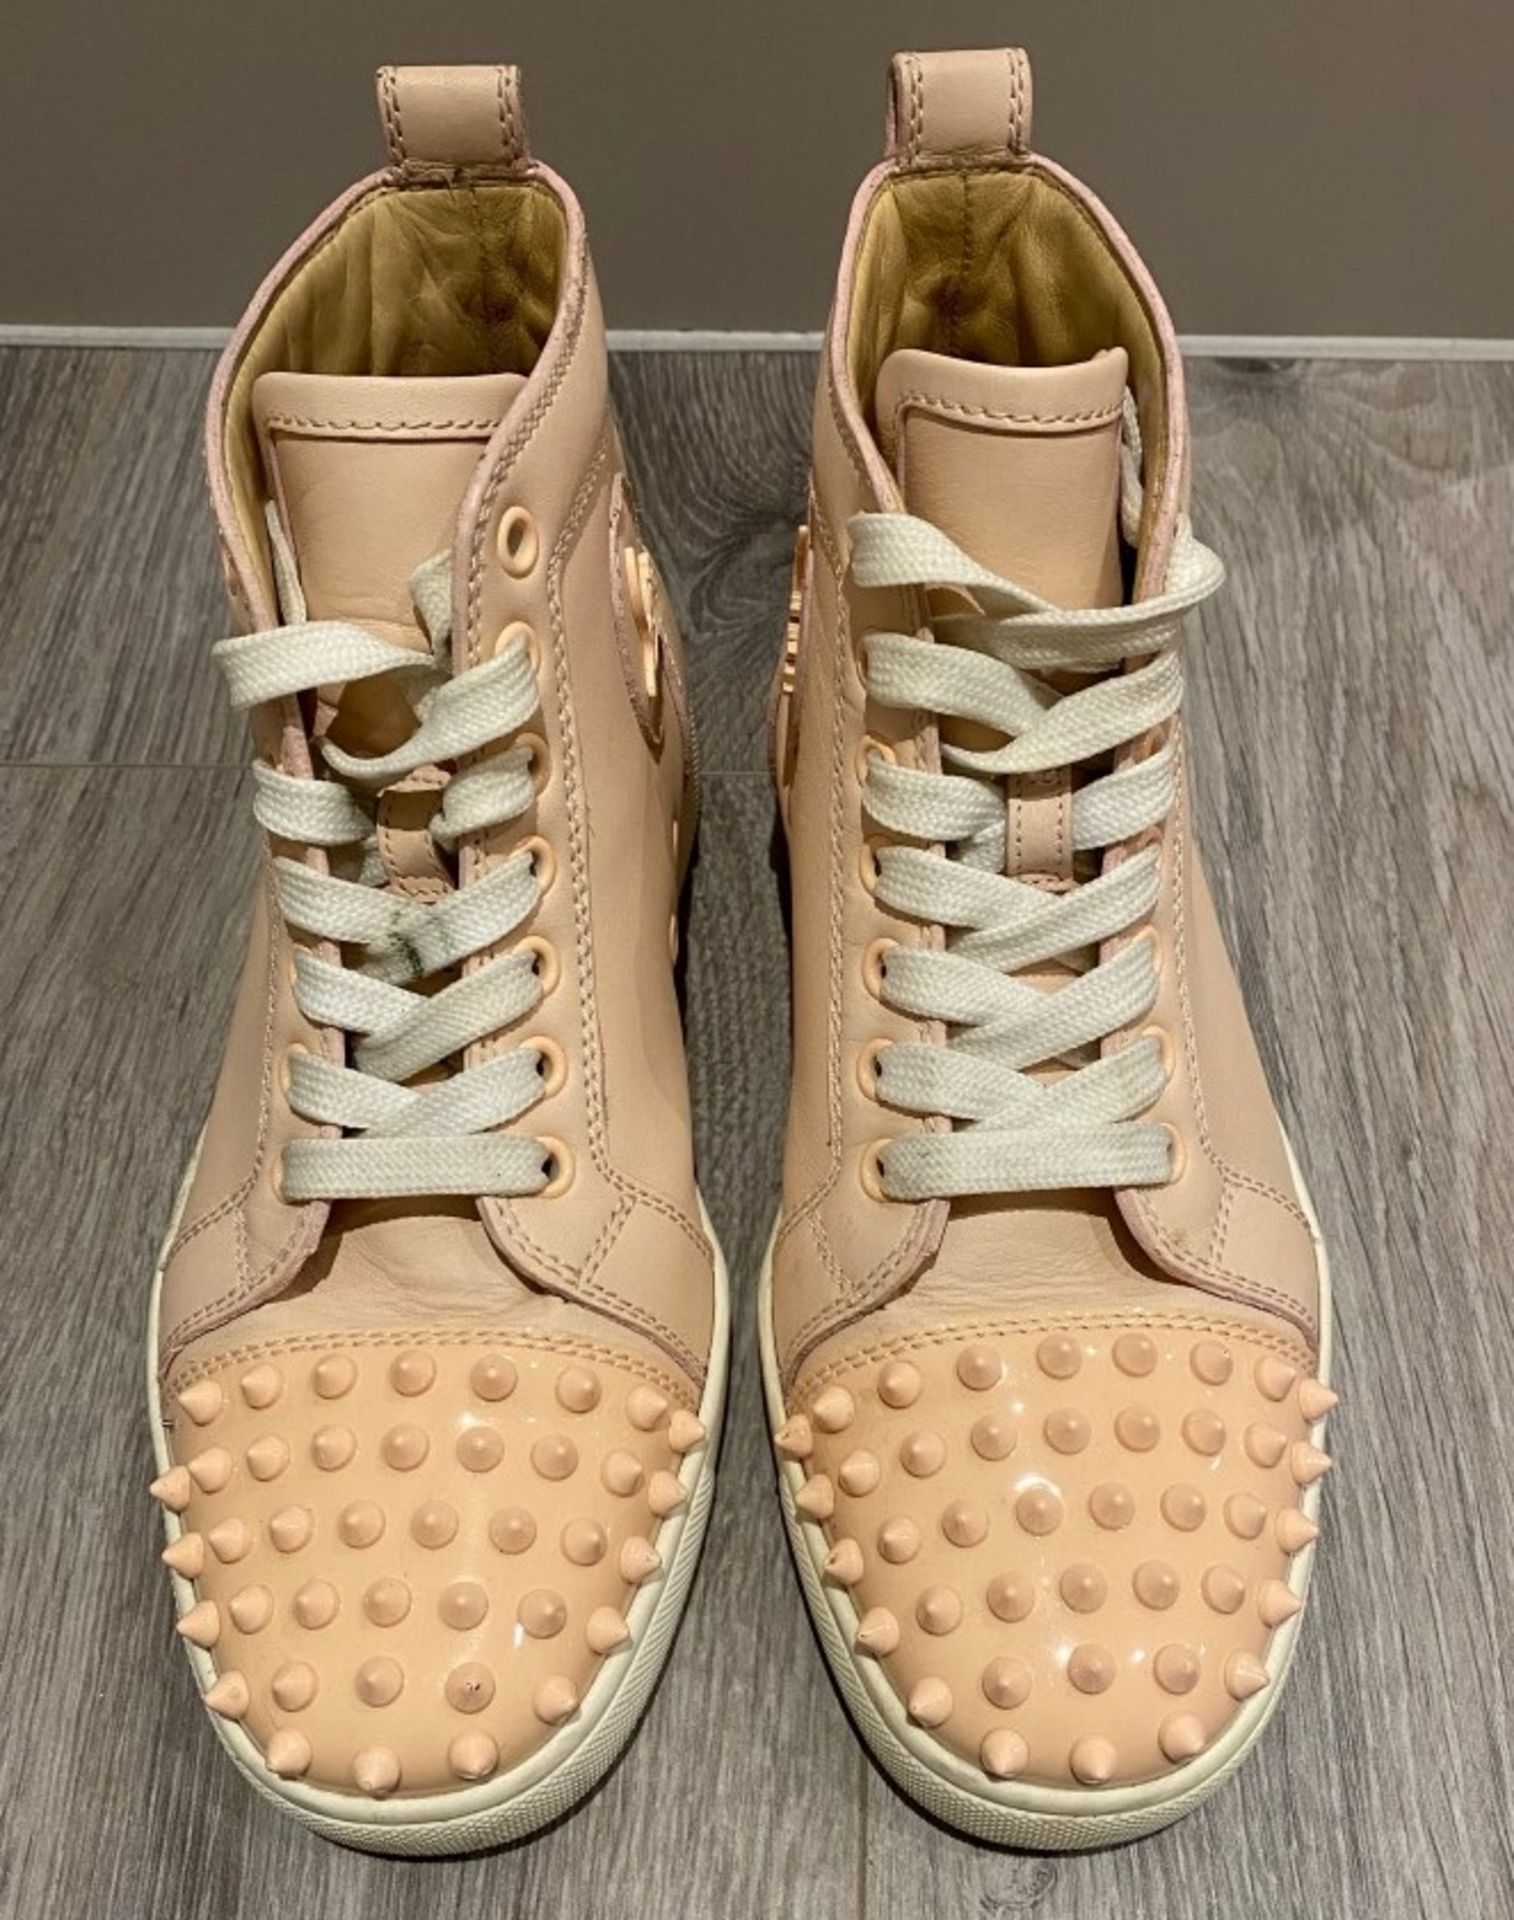 1 x Pair Of Genuine Christain Louboutin Sneakers In Light Pink - Size: 36.5 - Preowned in Very Good - Image 2 of 4